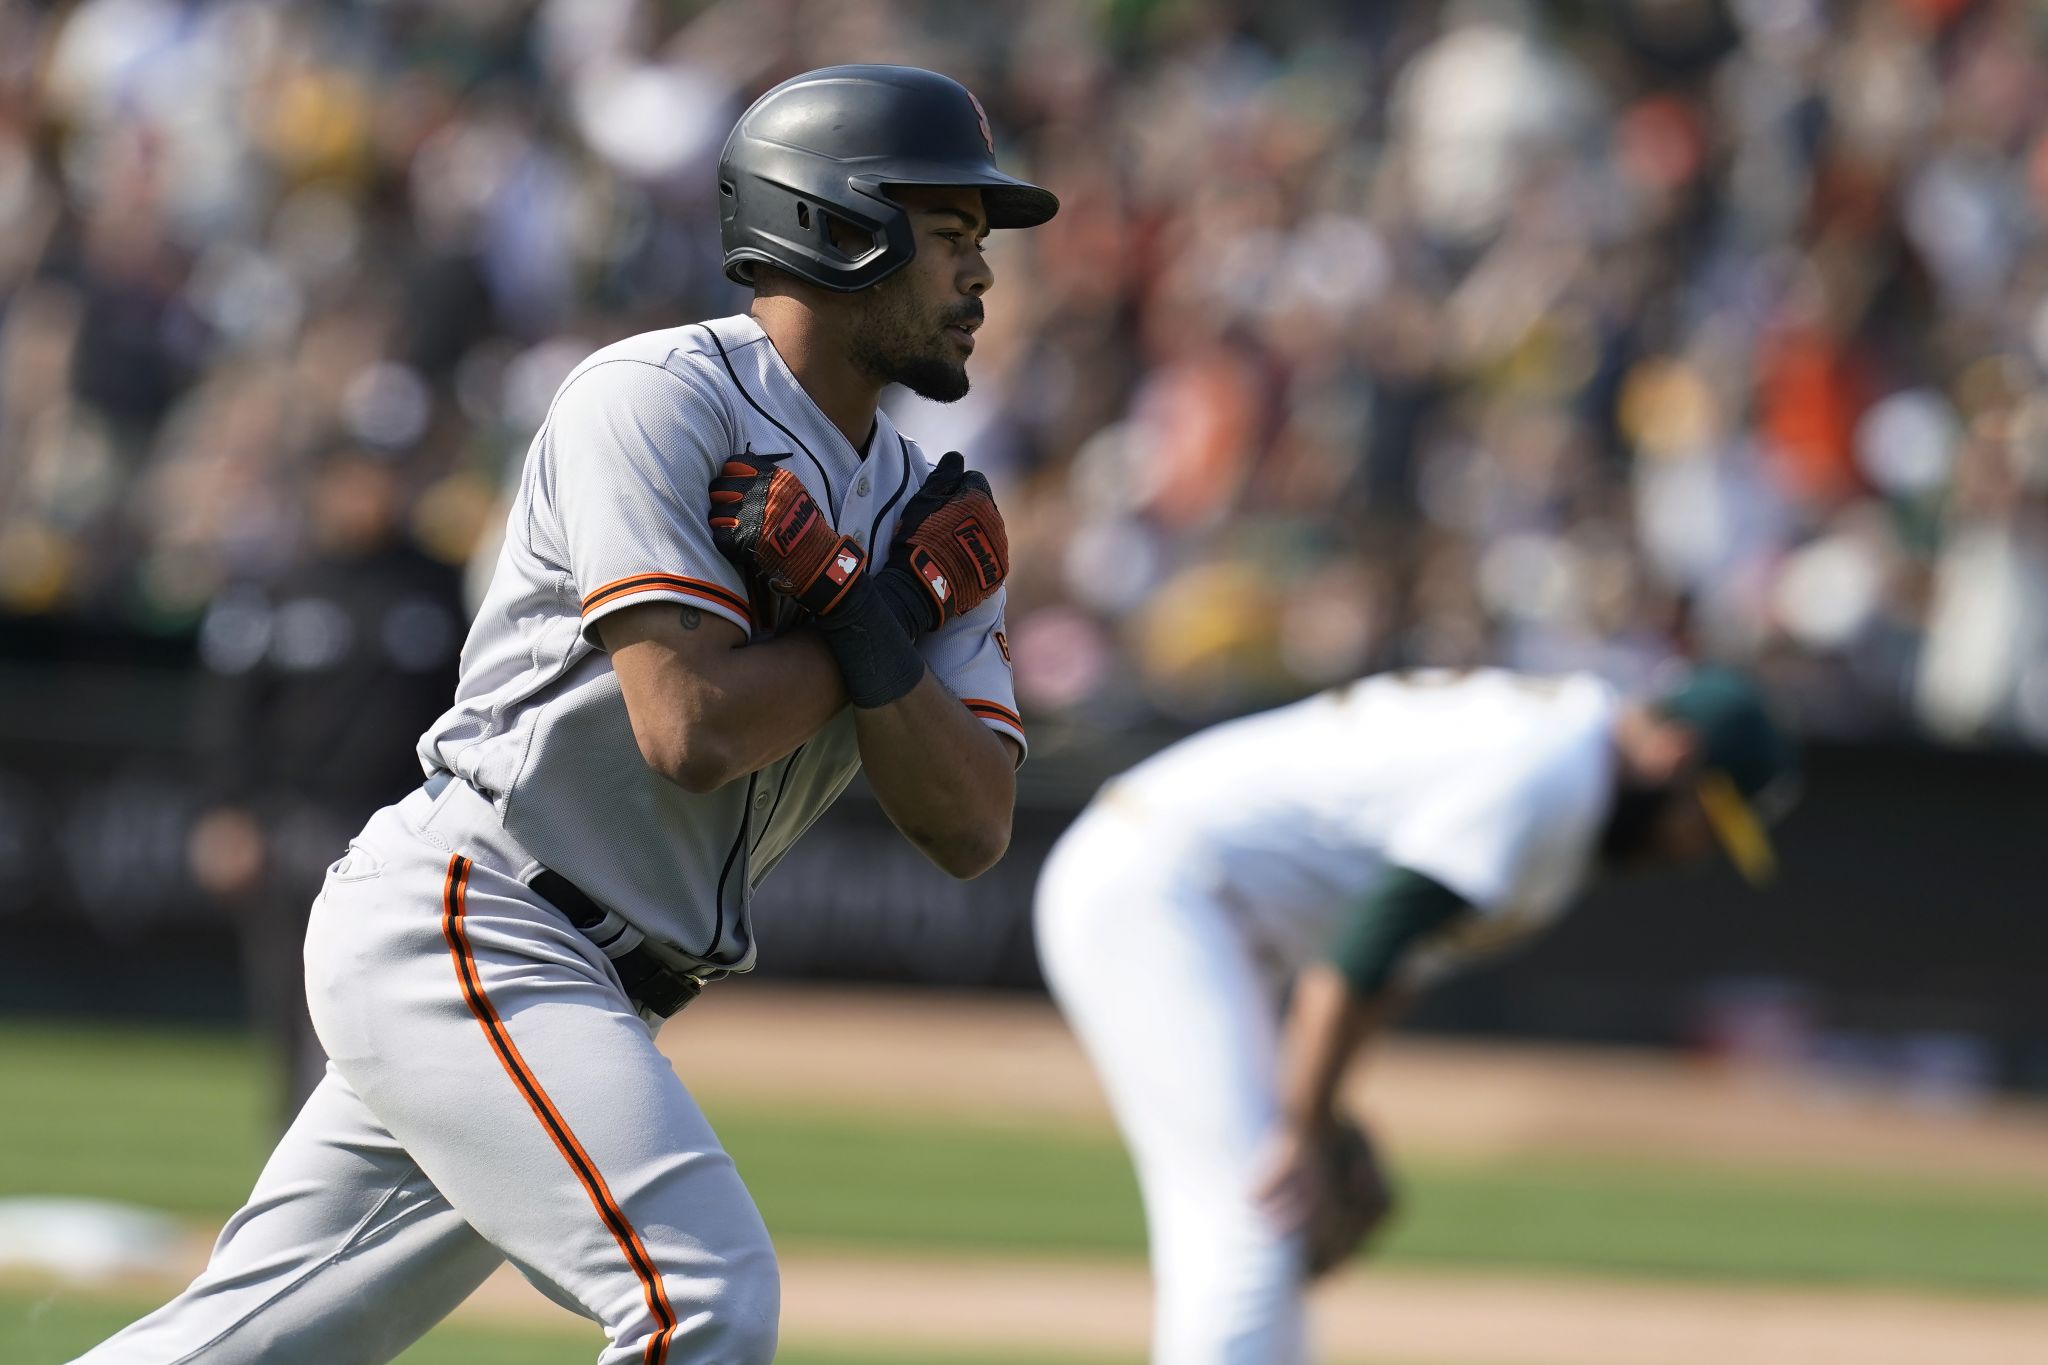 Giants try to gin up offense, start LaMonte Wade Jr. against a lefty